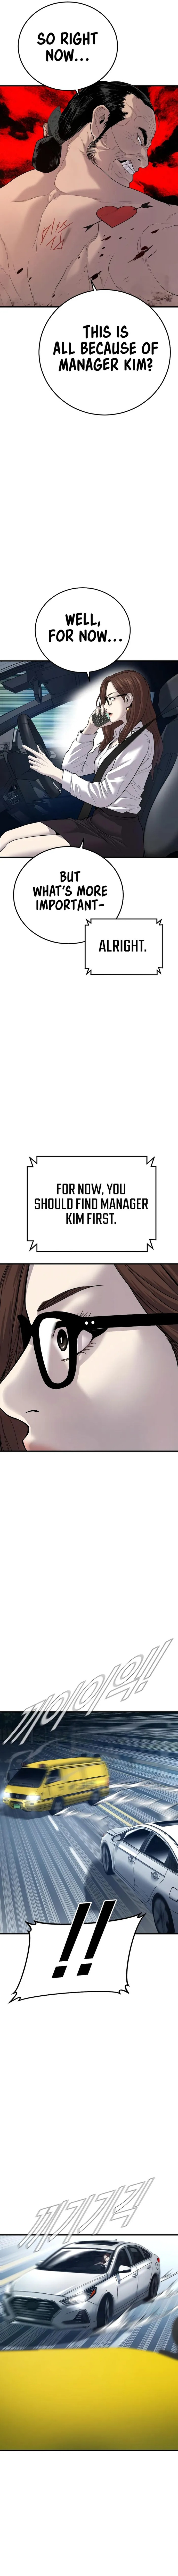 Manager Kim Chapter 86 Page 10